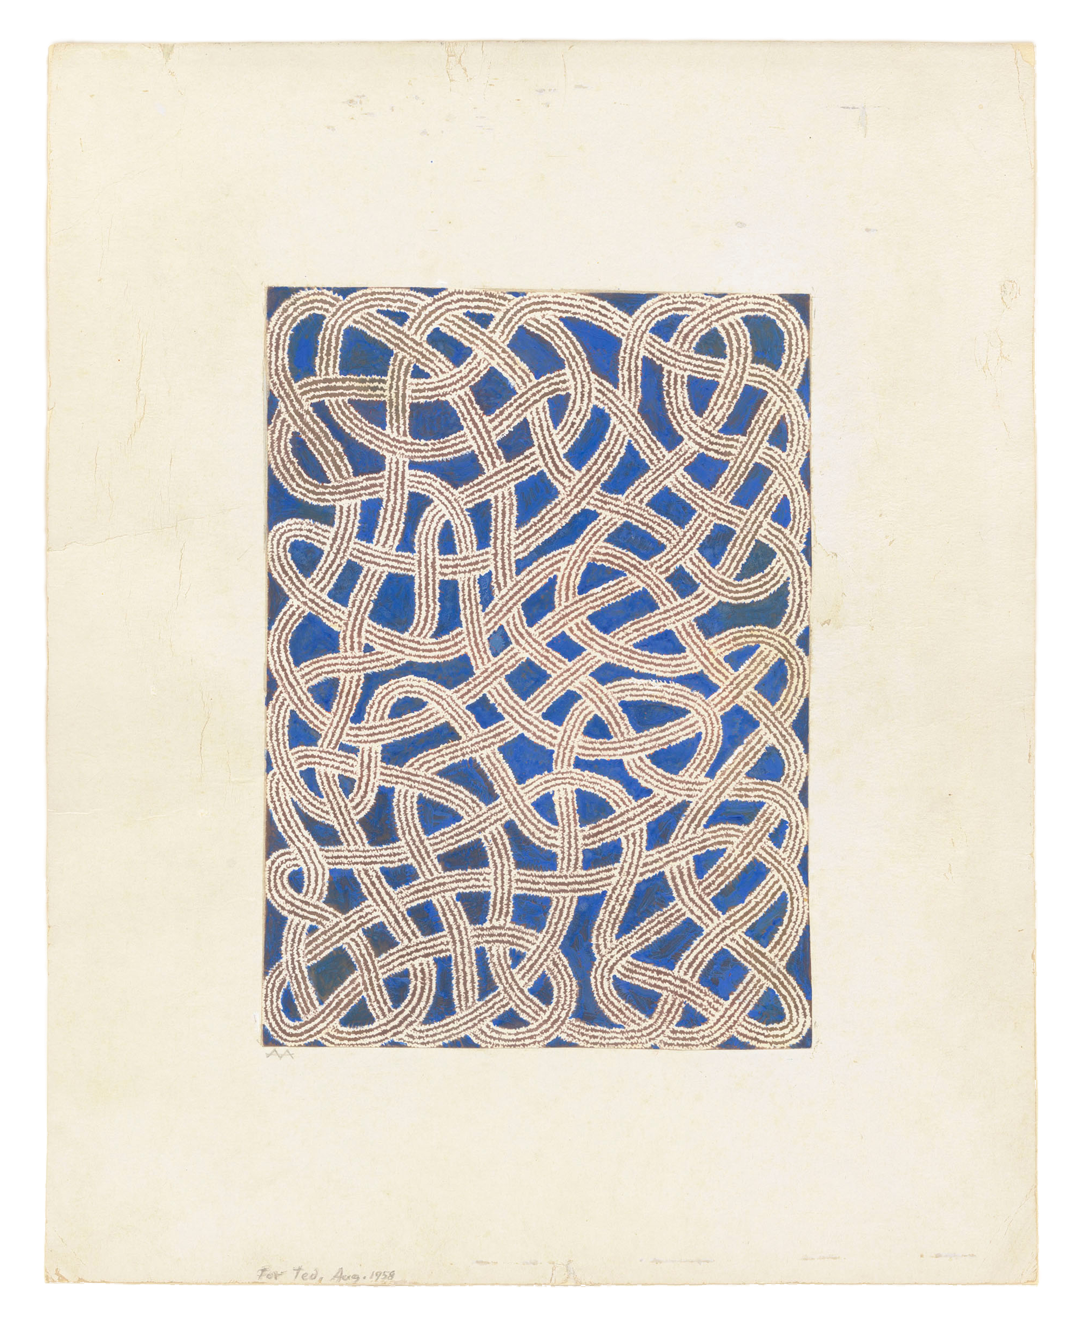 A multimedia work on paper by Anni Albers, titled Drawing for Nylon Rug, dated 1958.